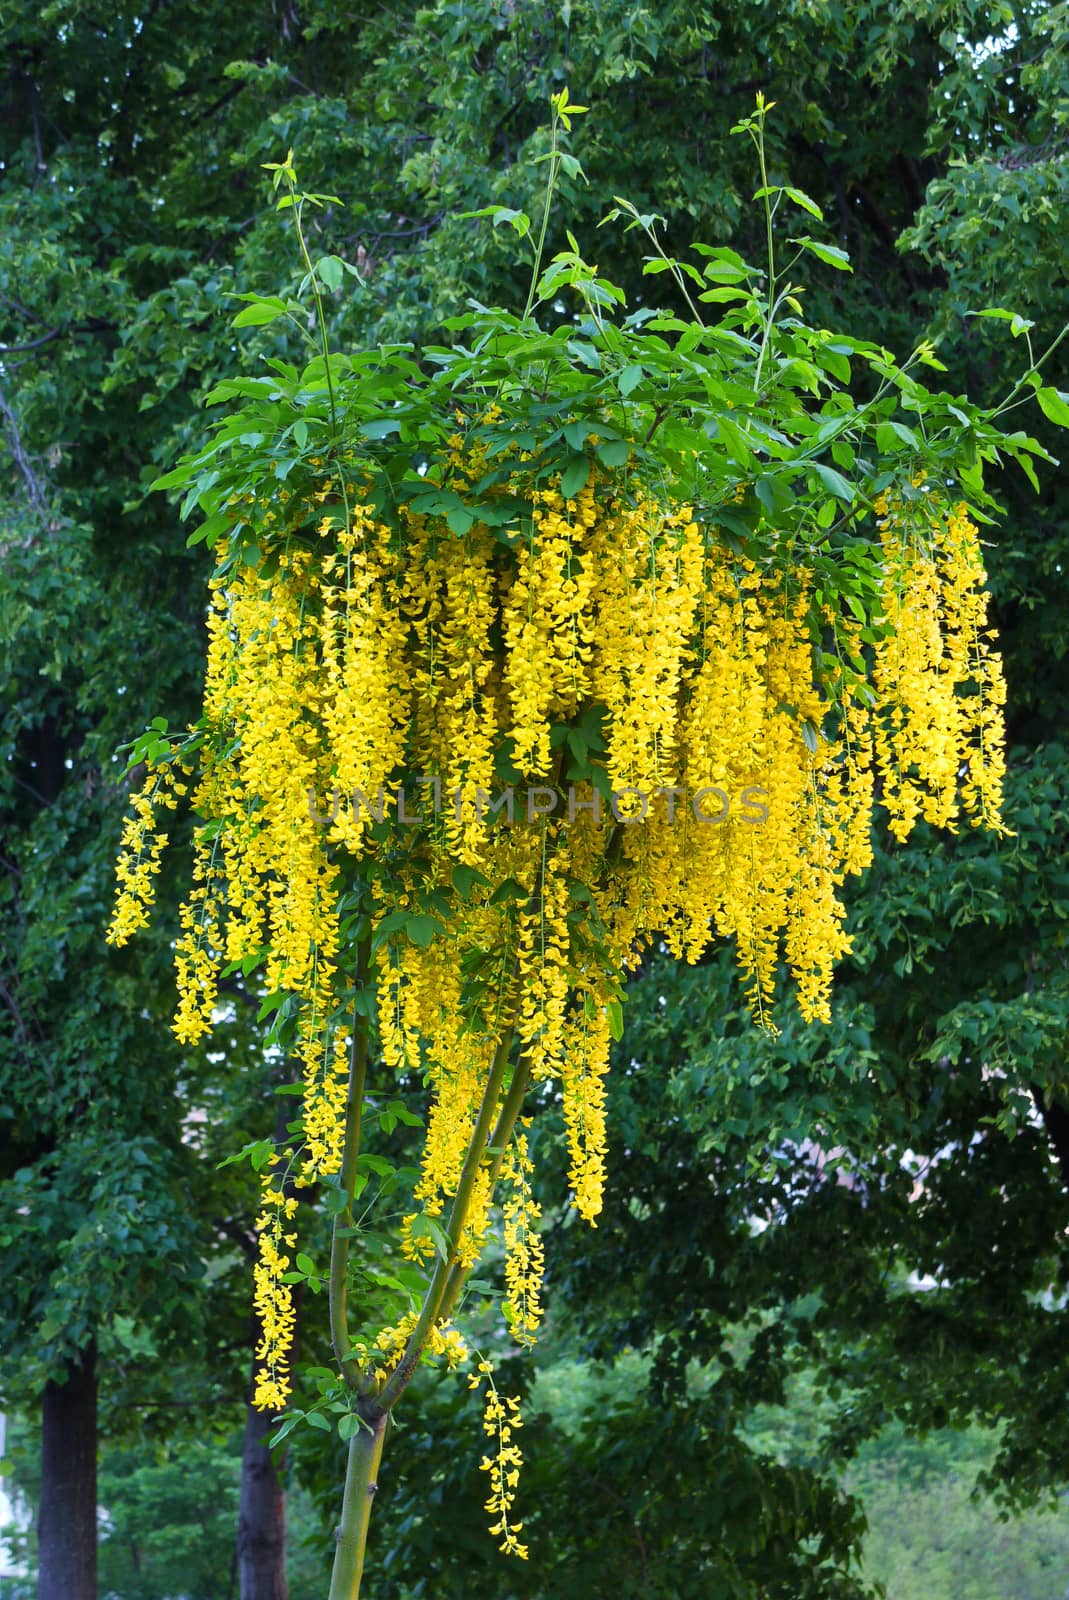 A tall bush with a stalk in the shape of a slingshot, blooms with yellow flower bells